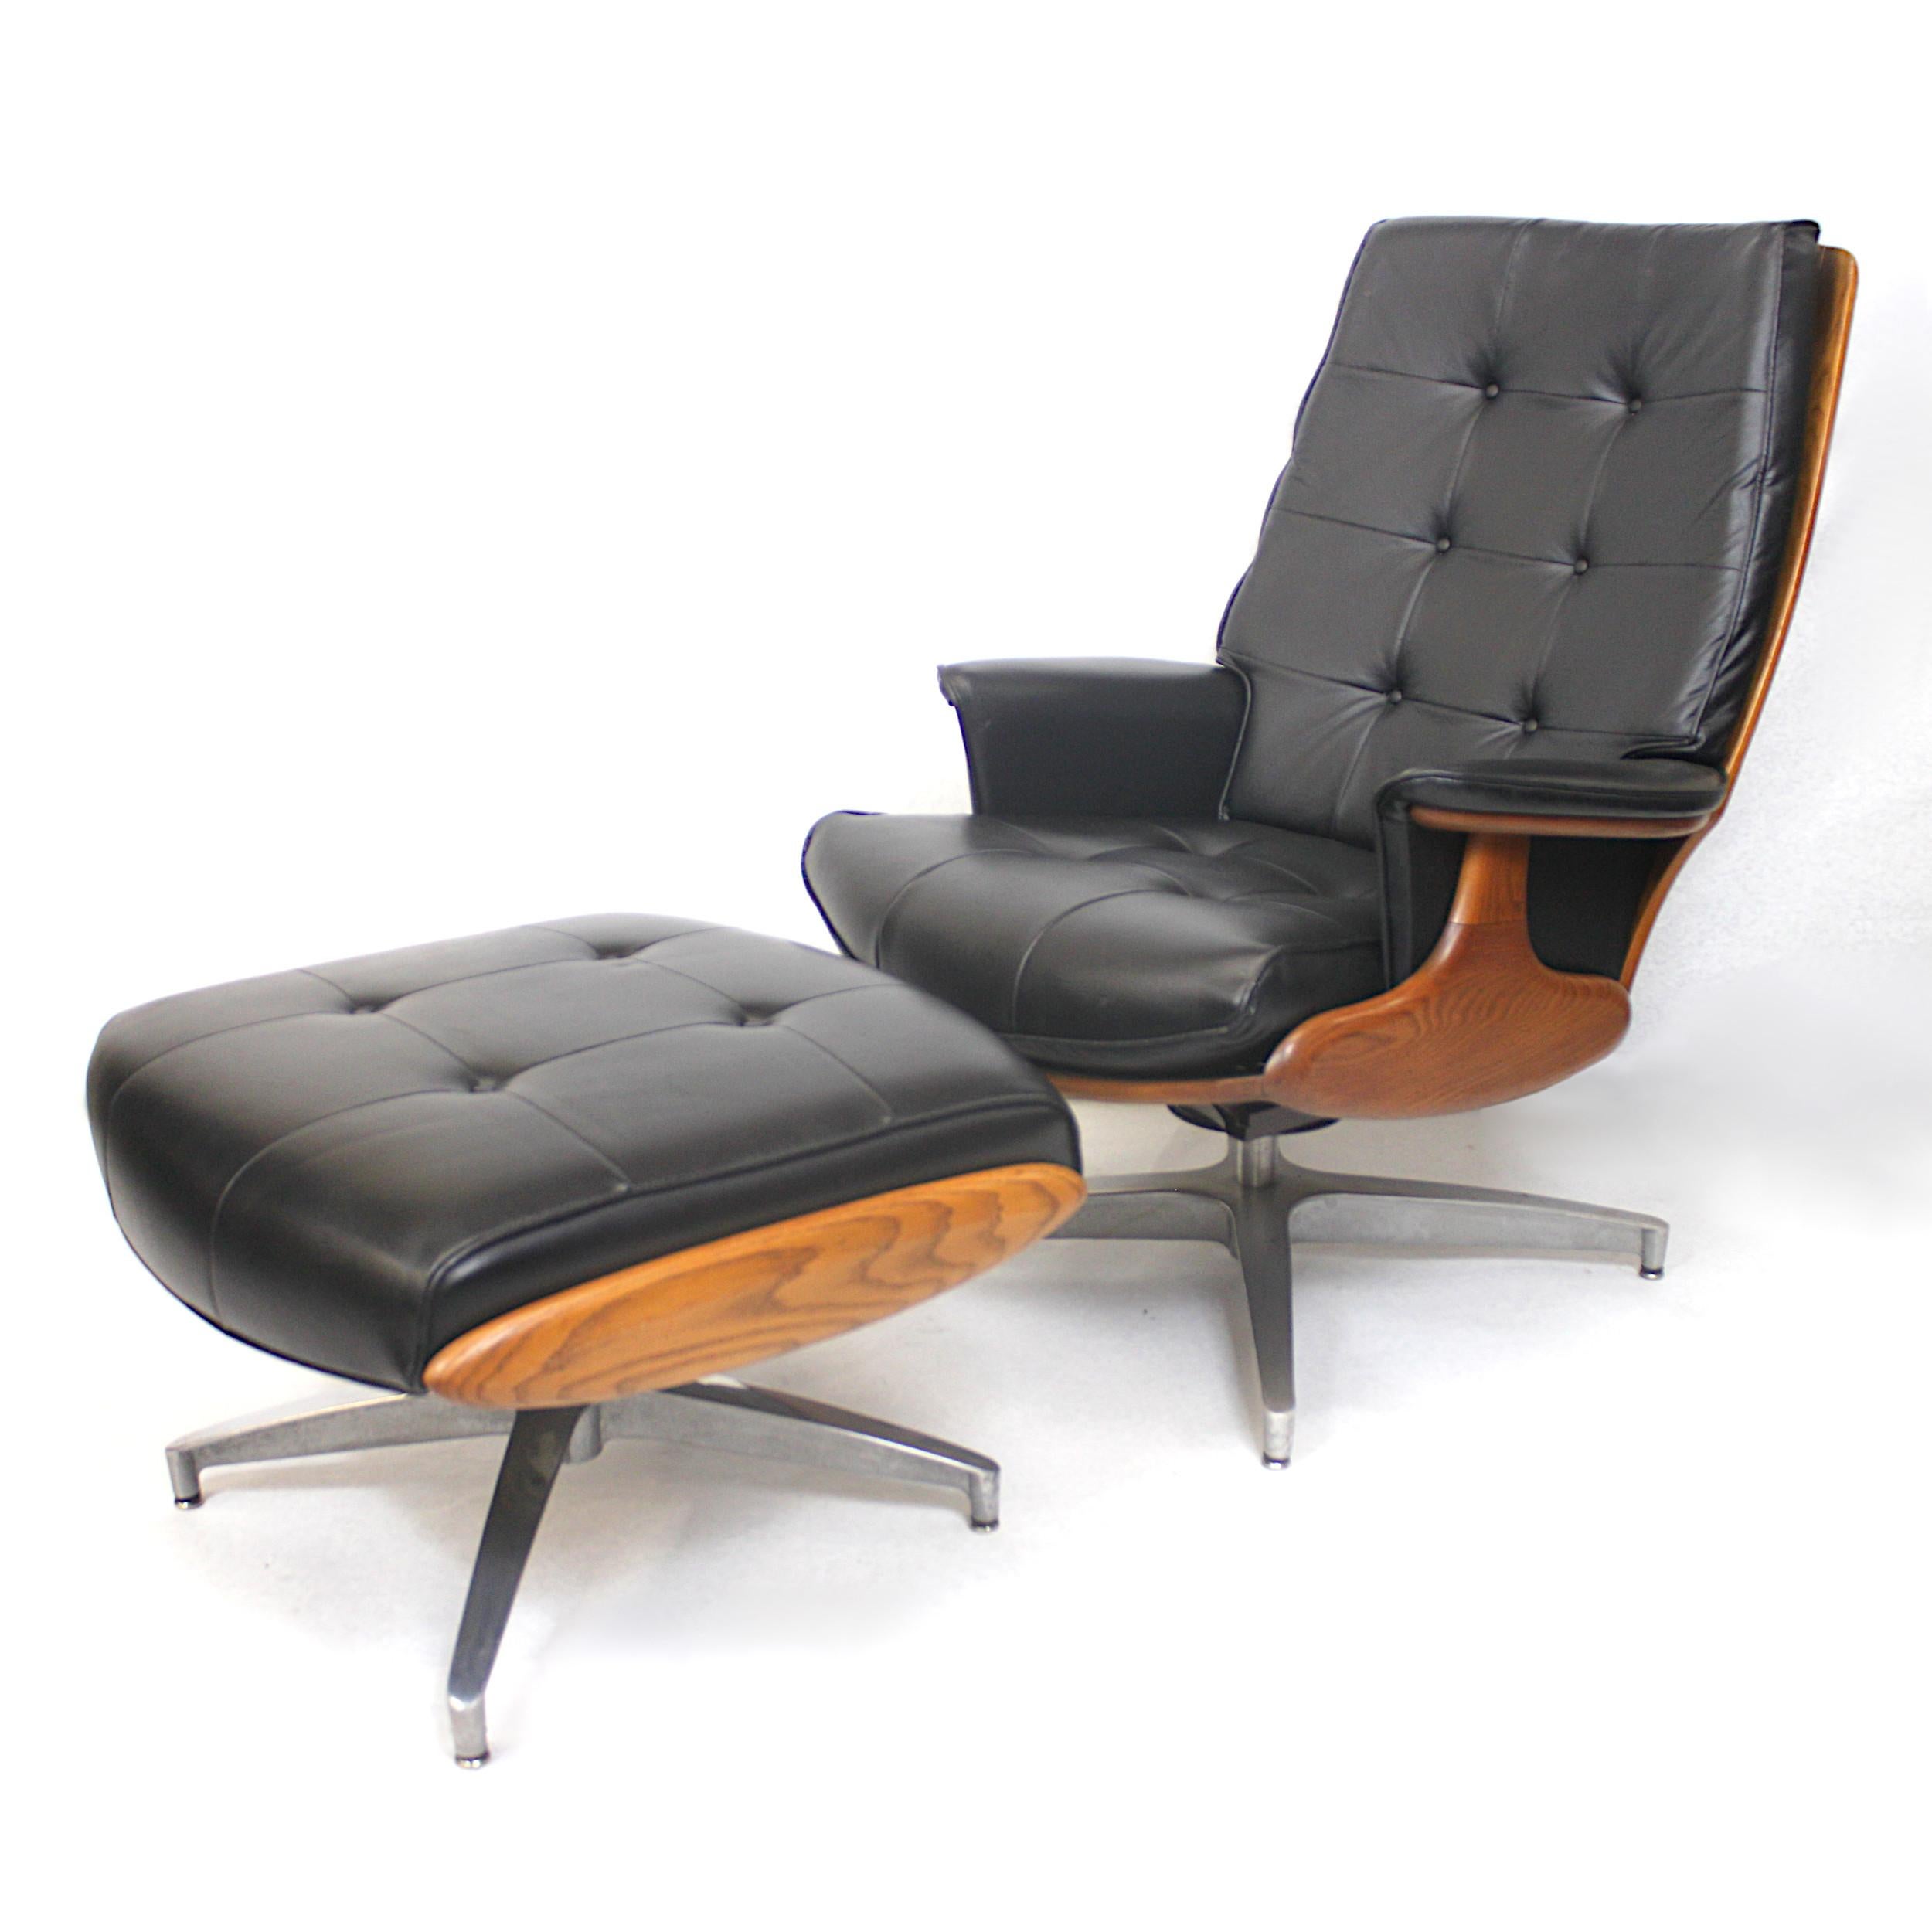 Awesome 1960s Mid-Century Modern lounge chair by Heywood Wakefield. The perfect combination of The Jetsons meets The Flintstones with its mix of wood, aluminum, and vinyl. An iconic design that makes a unique alternative to the Eames lounge chair.